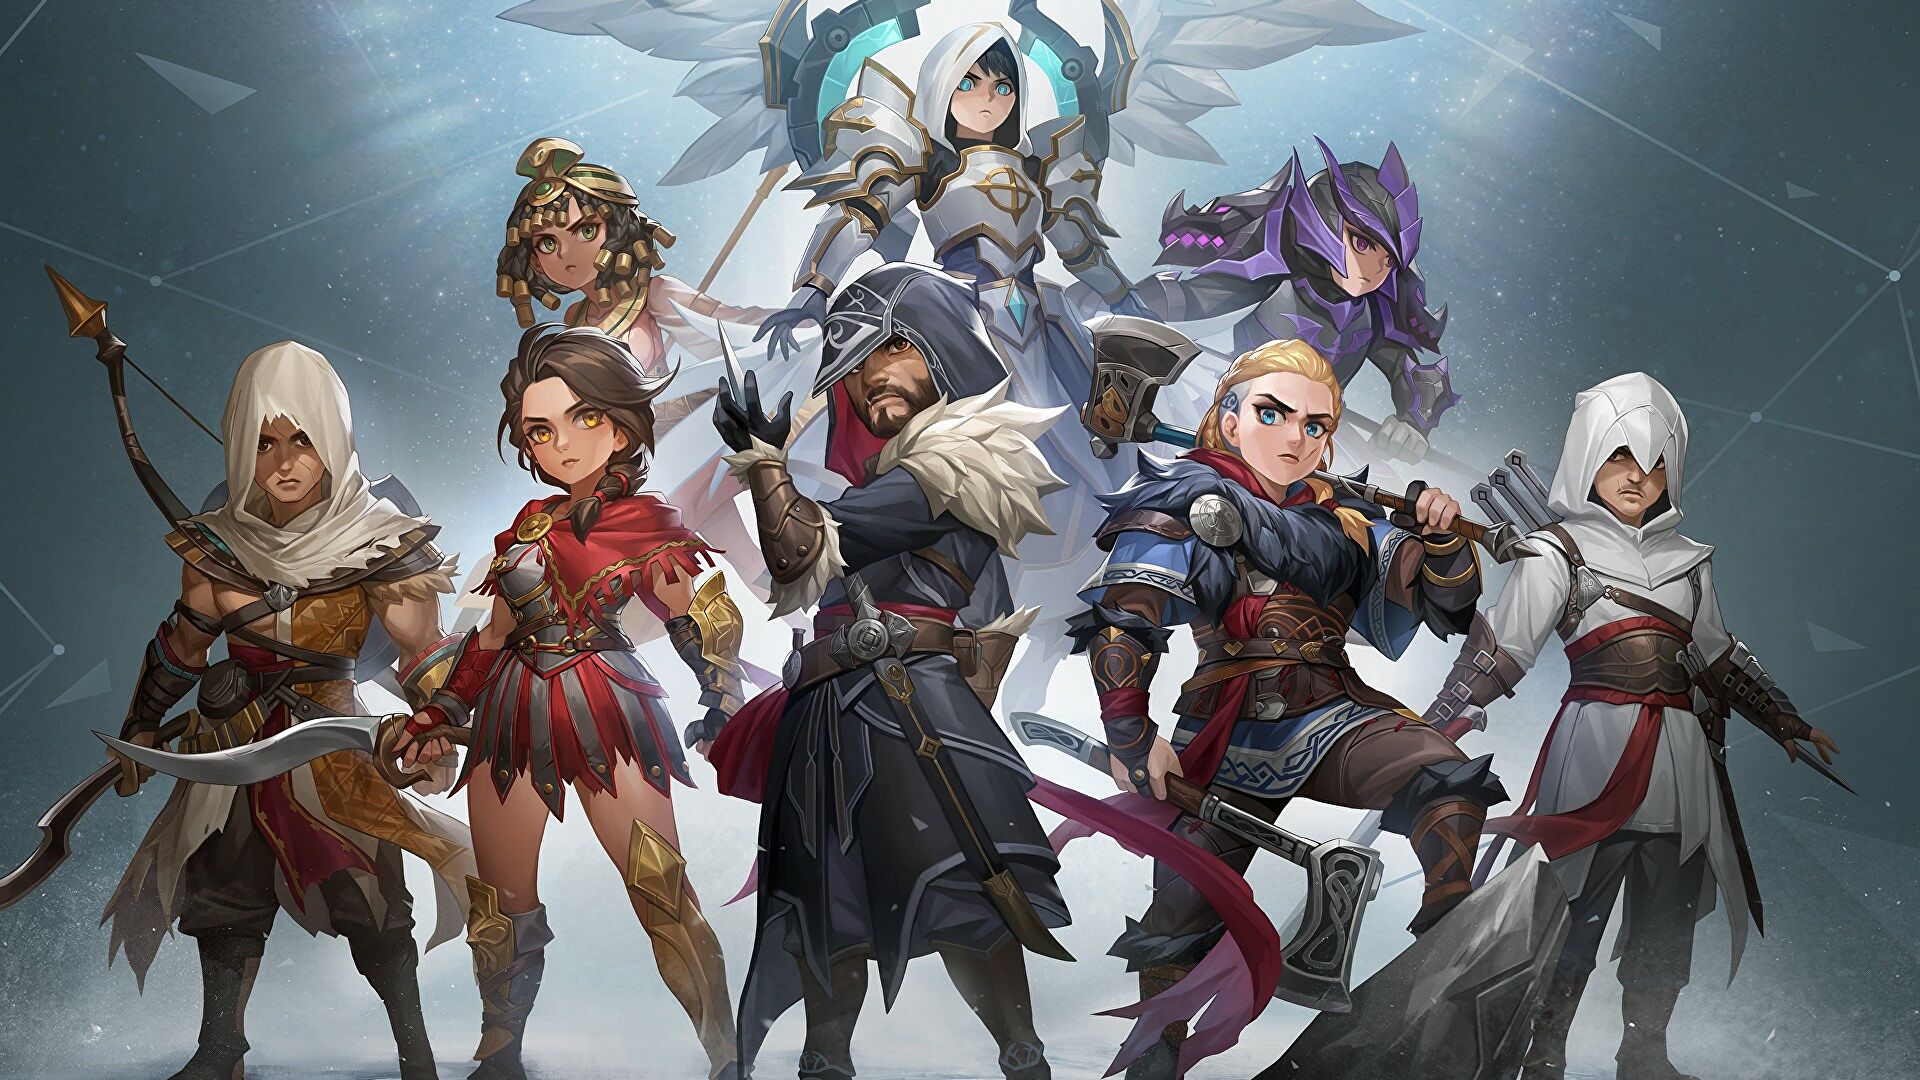 Summoners War: Sky Arena starts collaboration with Assassin's Creed